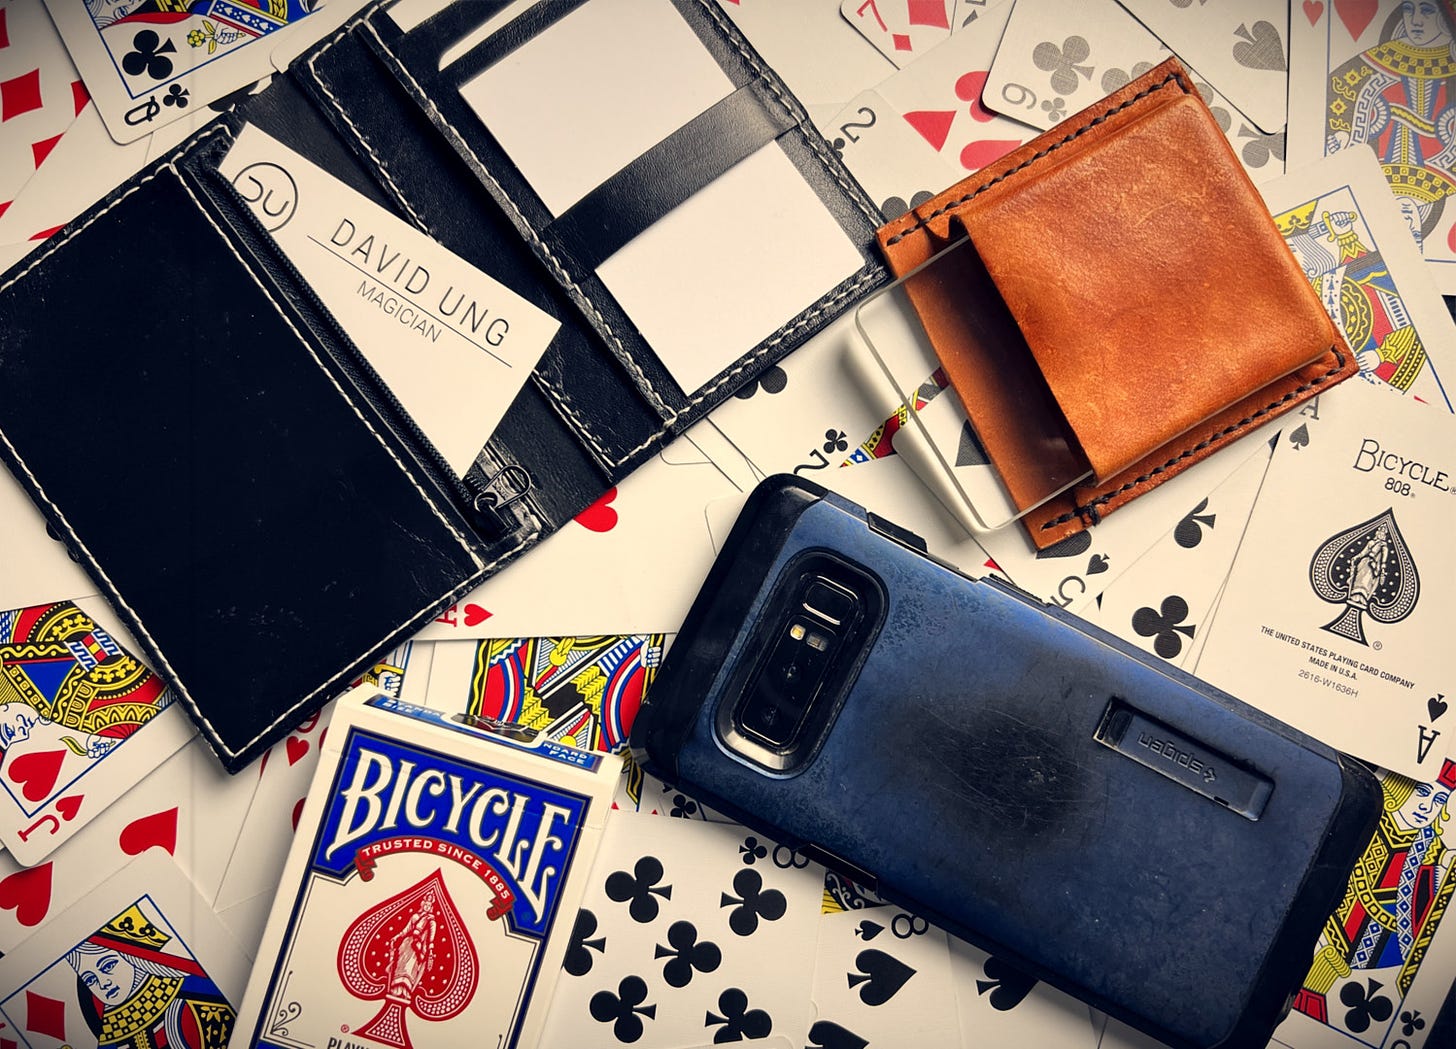 A wallet, omni deck, switcheroo, phone and deck of cards